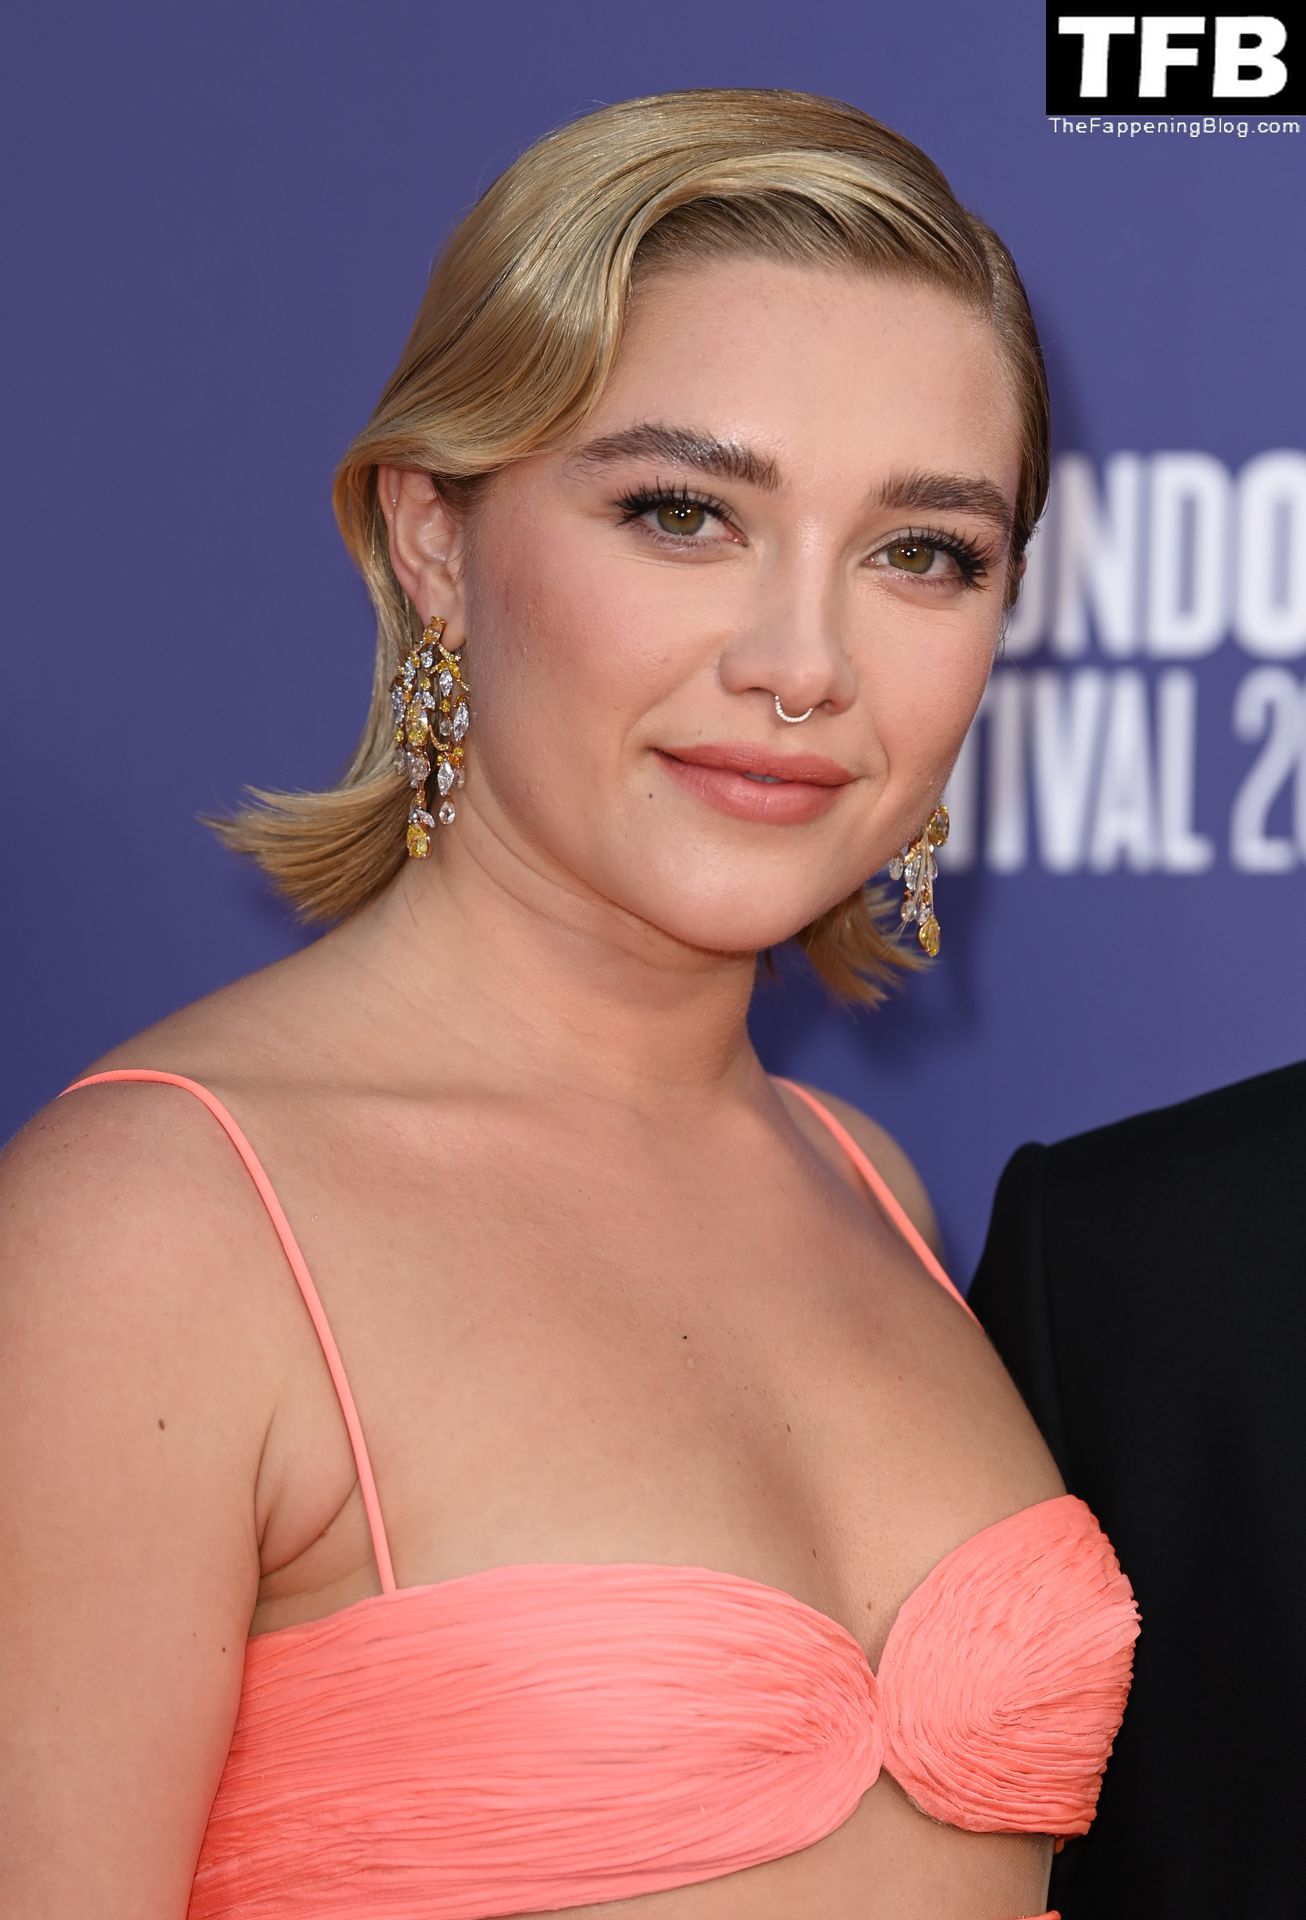 Florence-Pugh-Sexy-The-Fappening-Blog-58-1.jpg